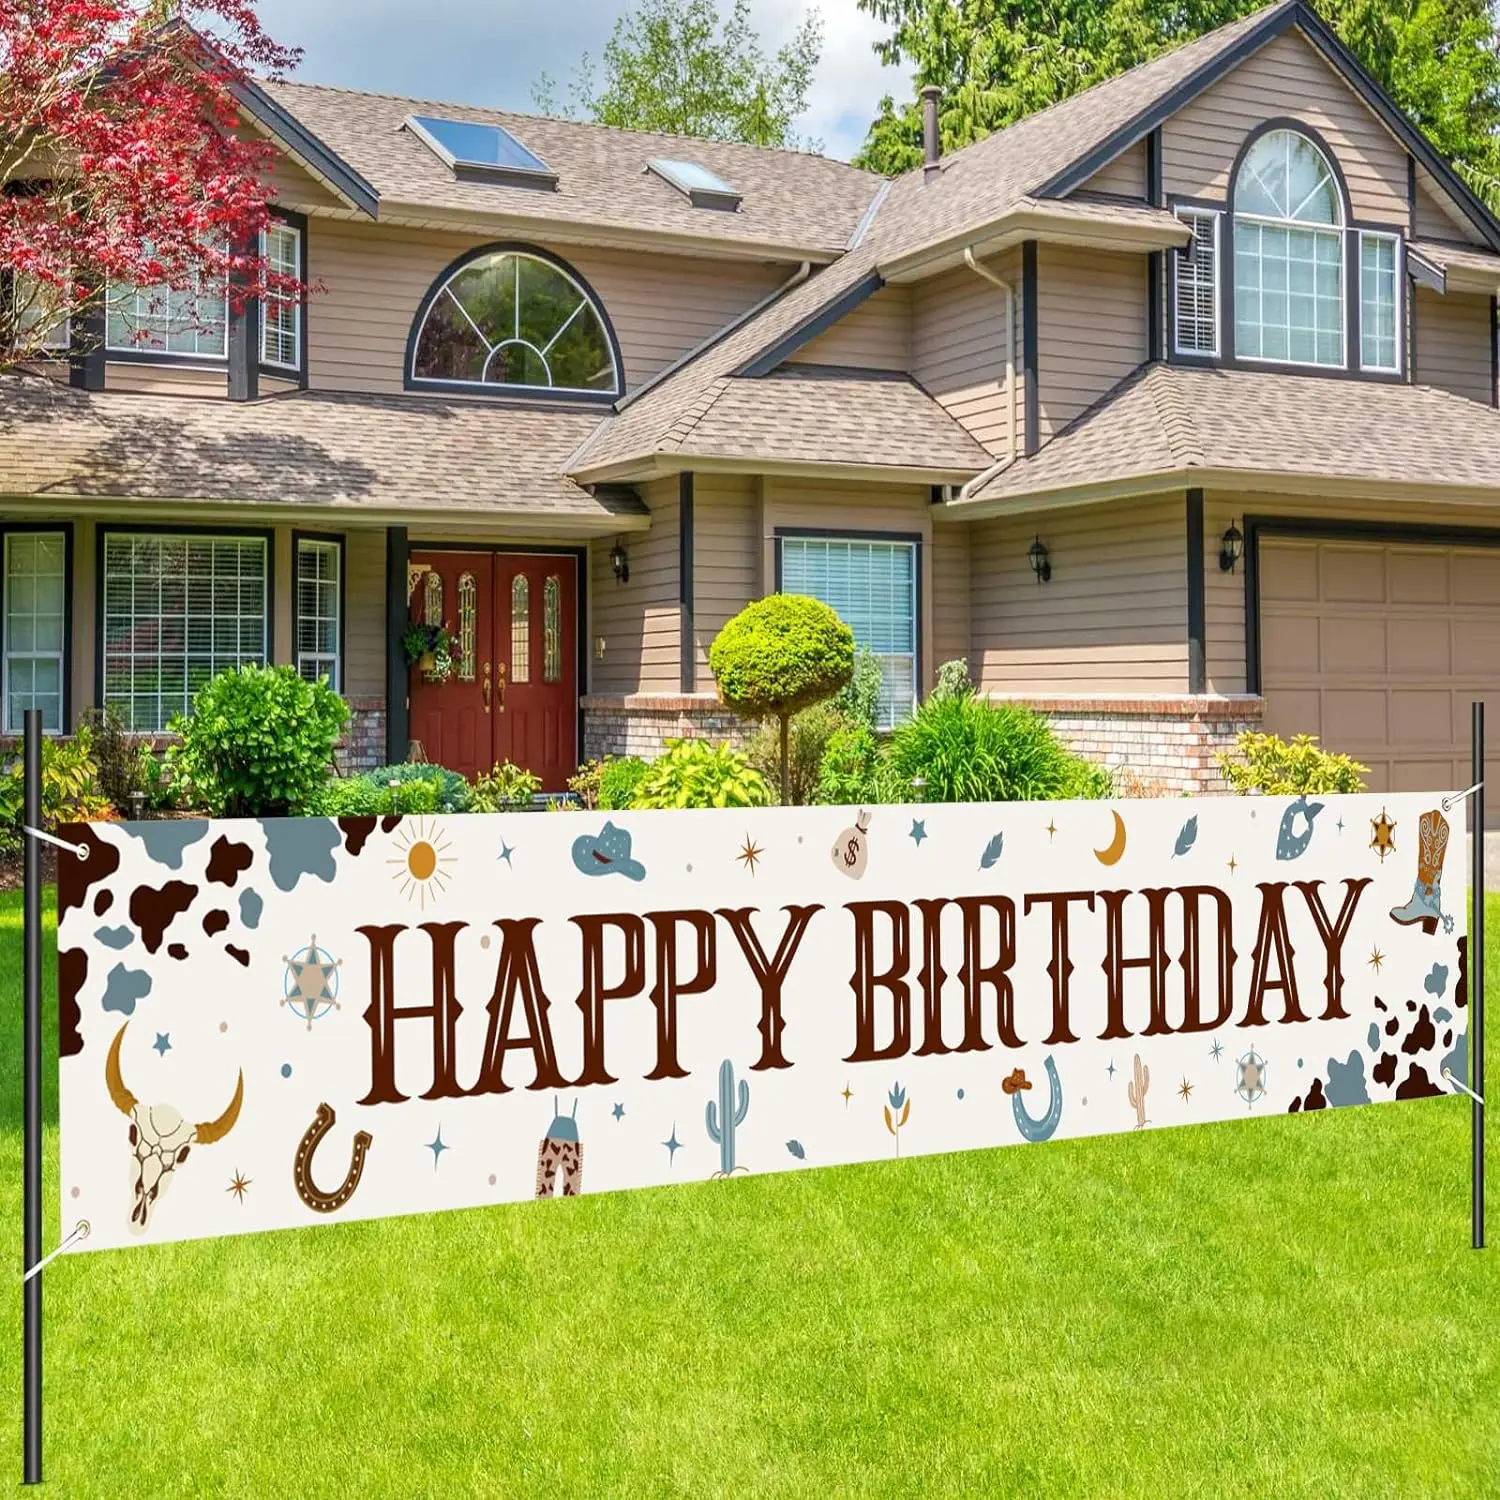 

Cowboy Happy Birthday Banner, Large Western Theme Yard Sign, Wild West Party Decor, Photo Booth Props for Indoor and Outdoor